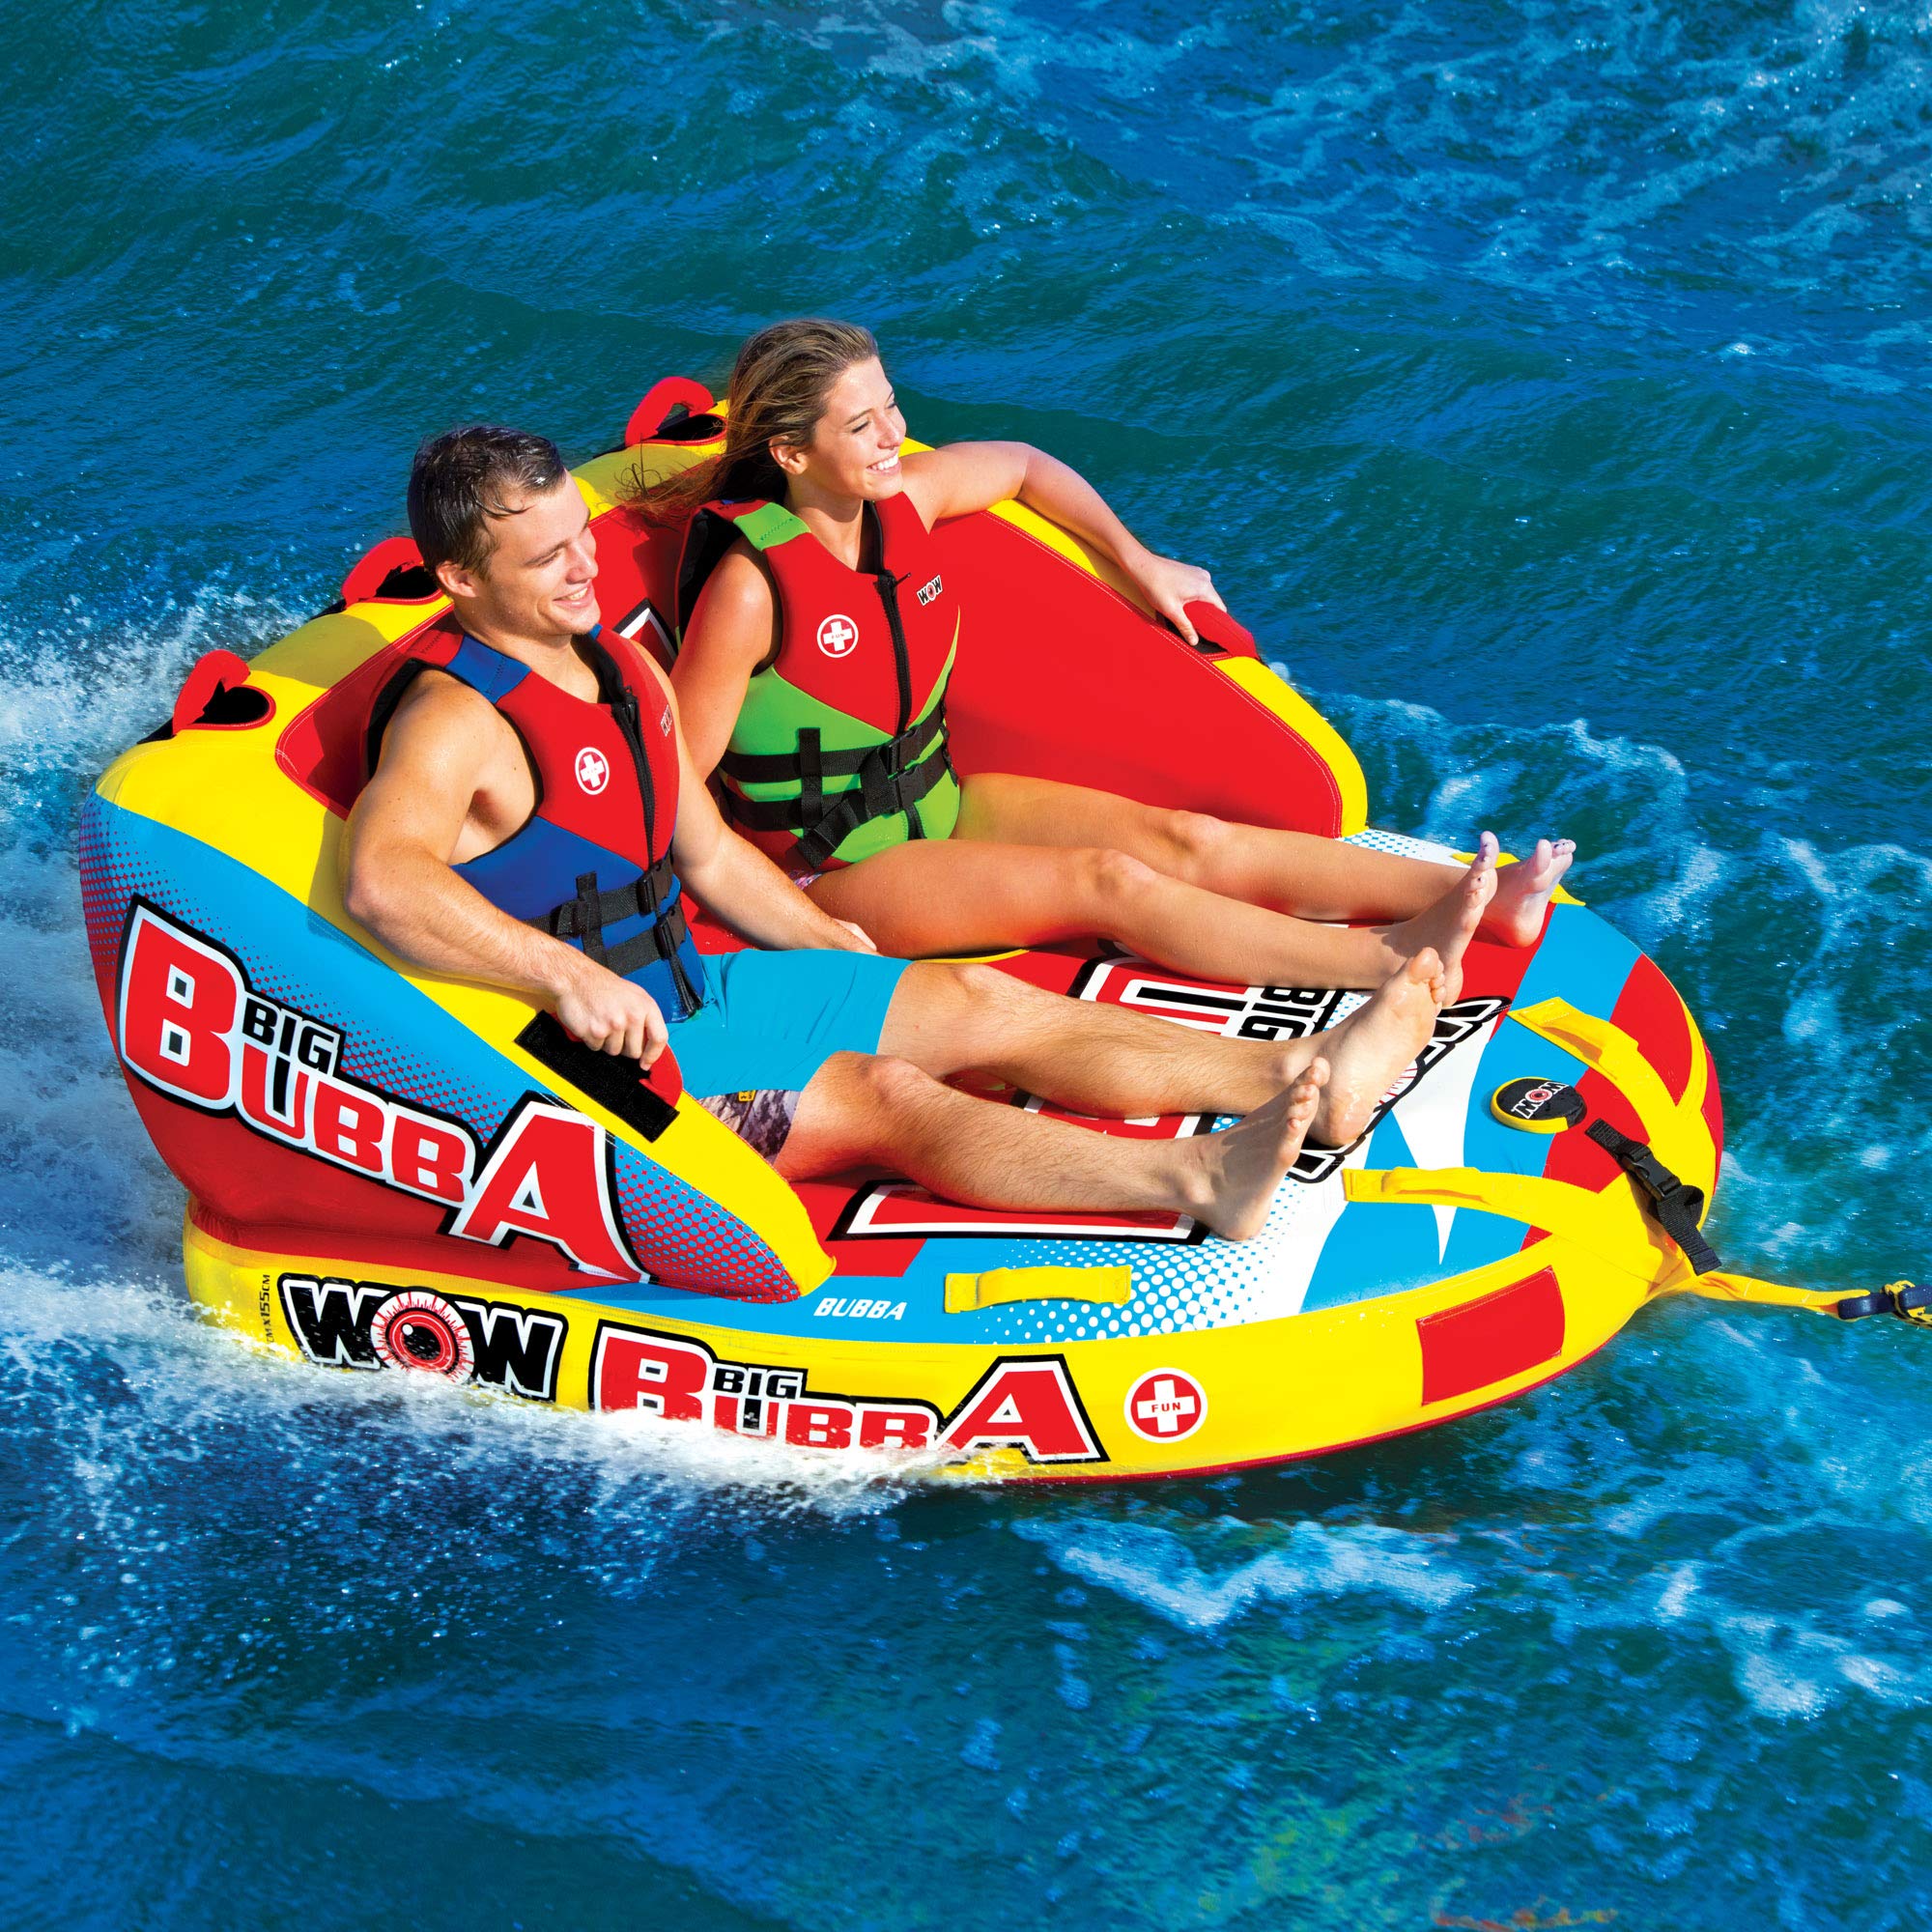 Wow Sports Big Bubba 1 or 2 Persons Inflatable Towable Tube for Boating